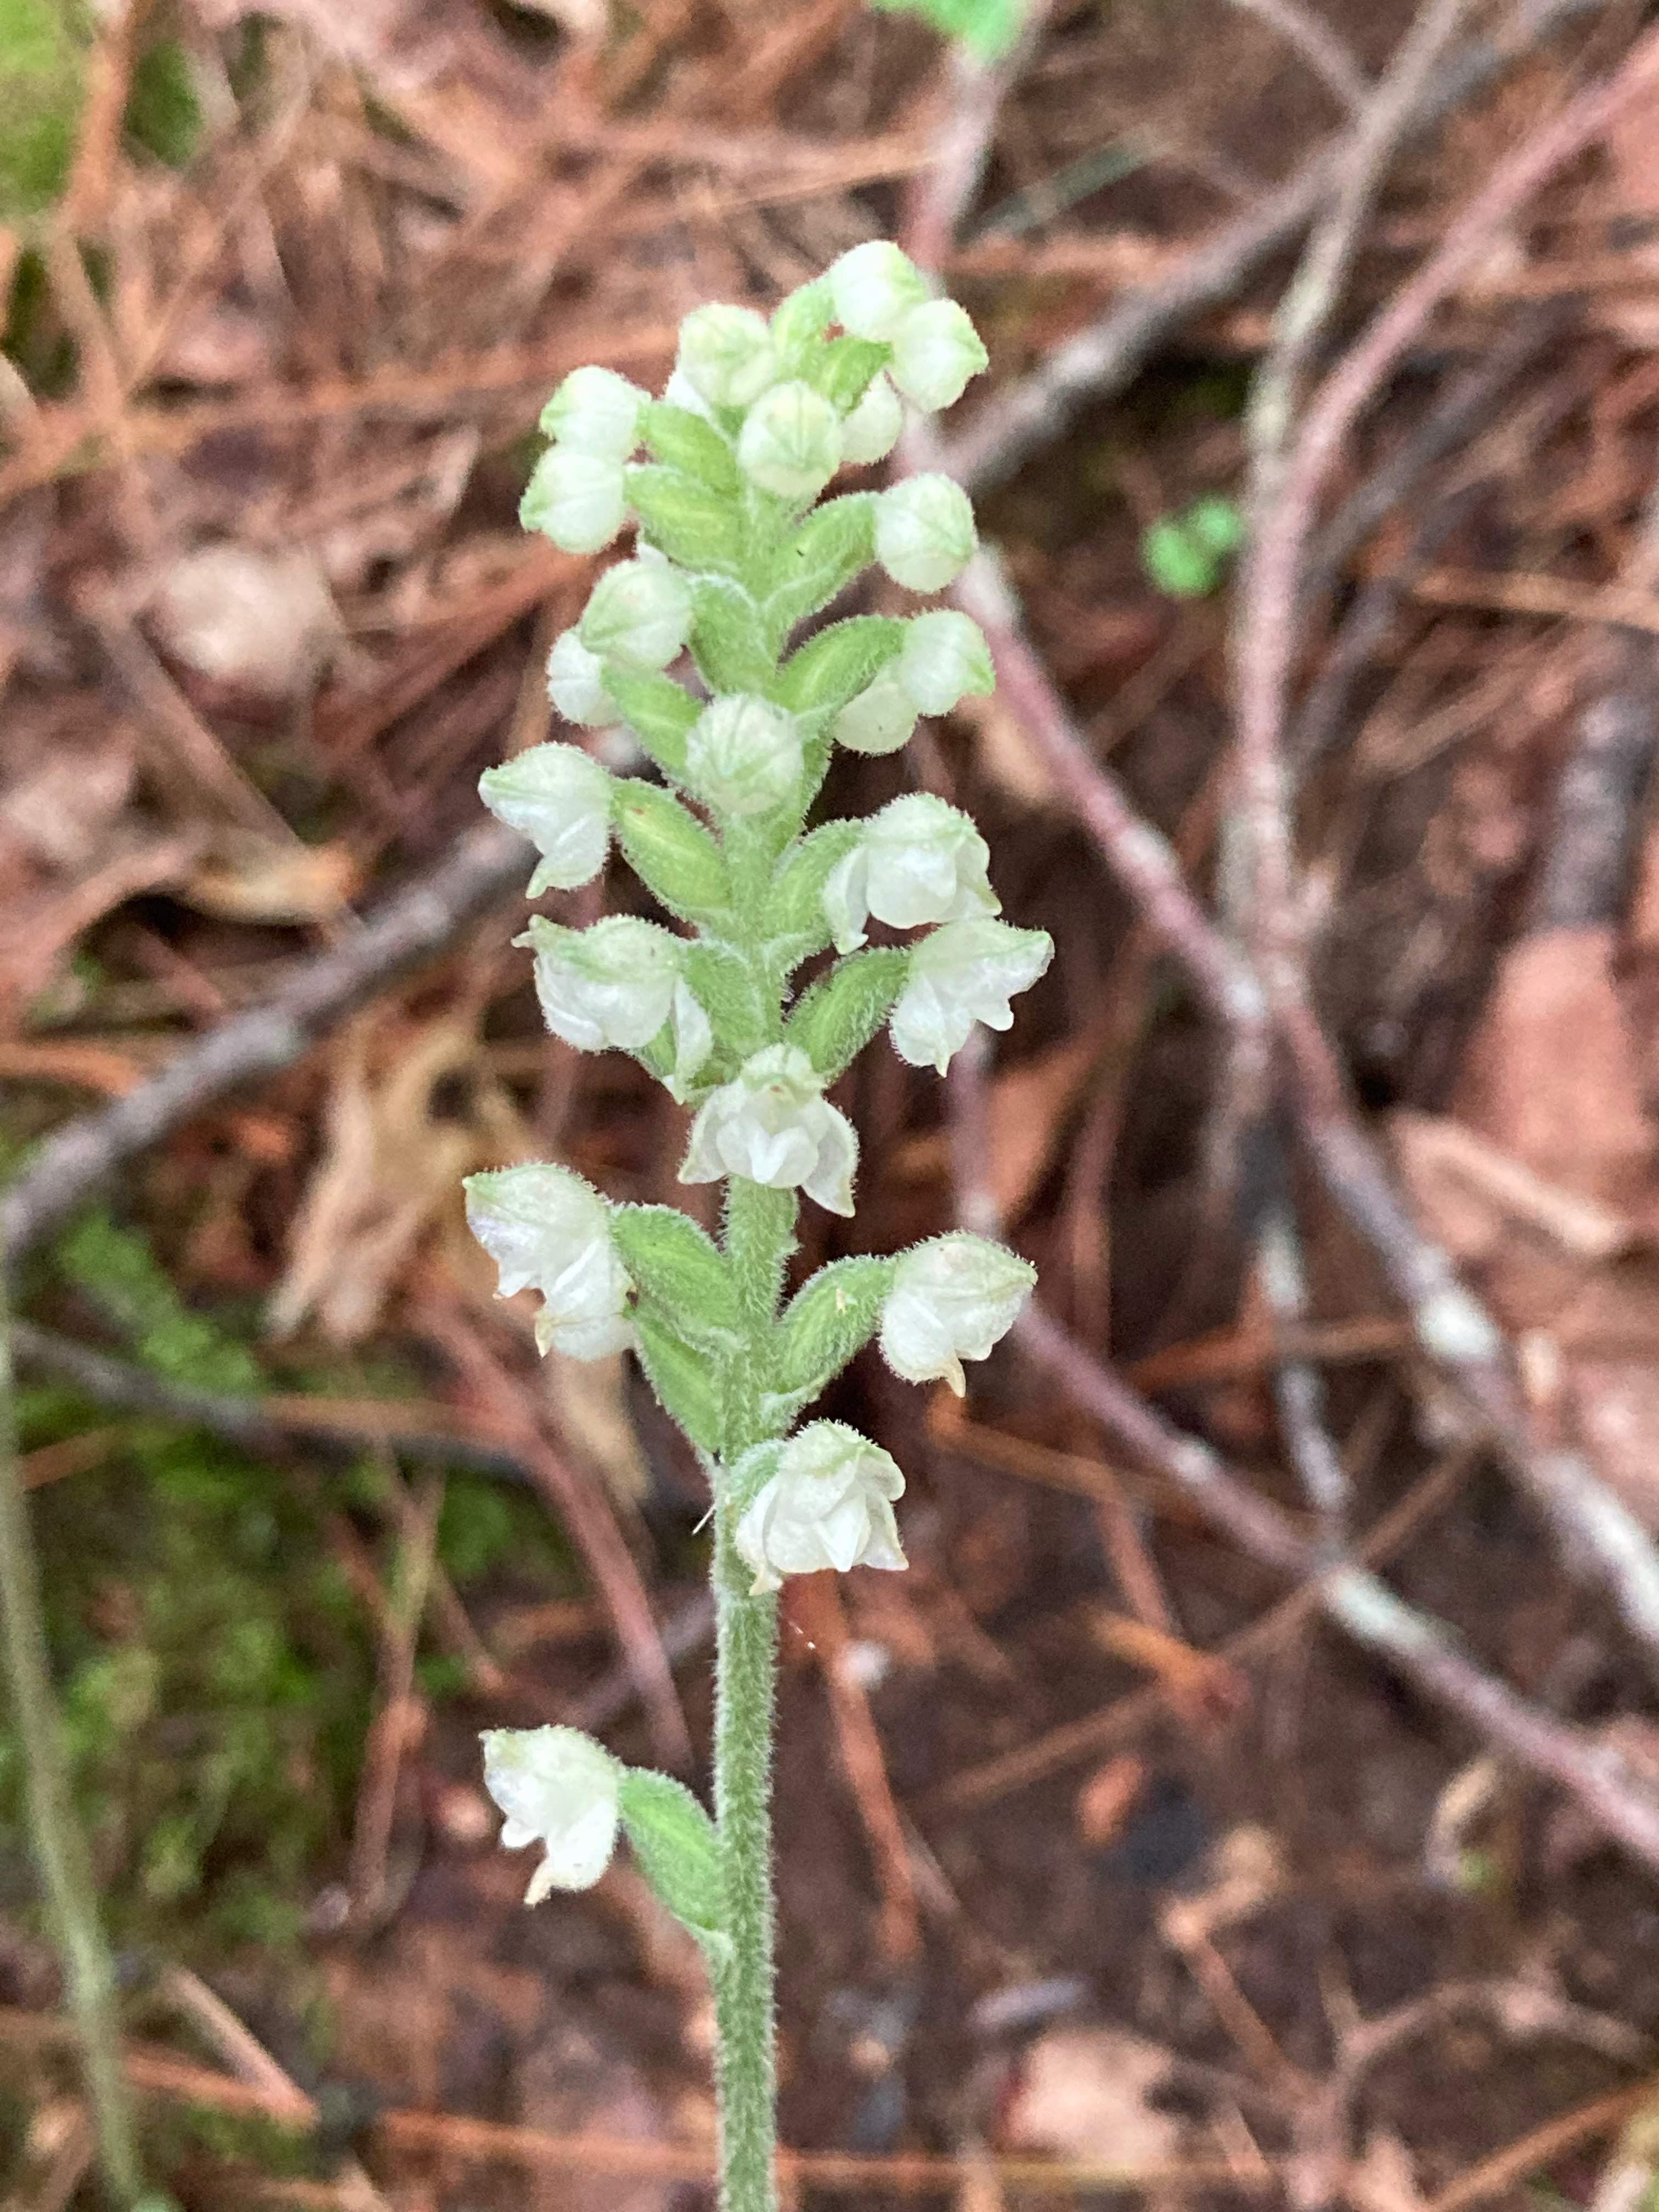 The Scientific Name is Goodyera pubescens. You will likely hear them called Downy Rattlesnake-orchid, Downy Rattlesnake-plantain. This picture shows the Very pubescent inflorescence. of Goodyera pubescens